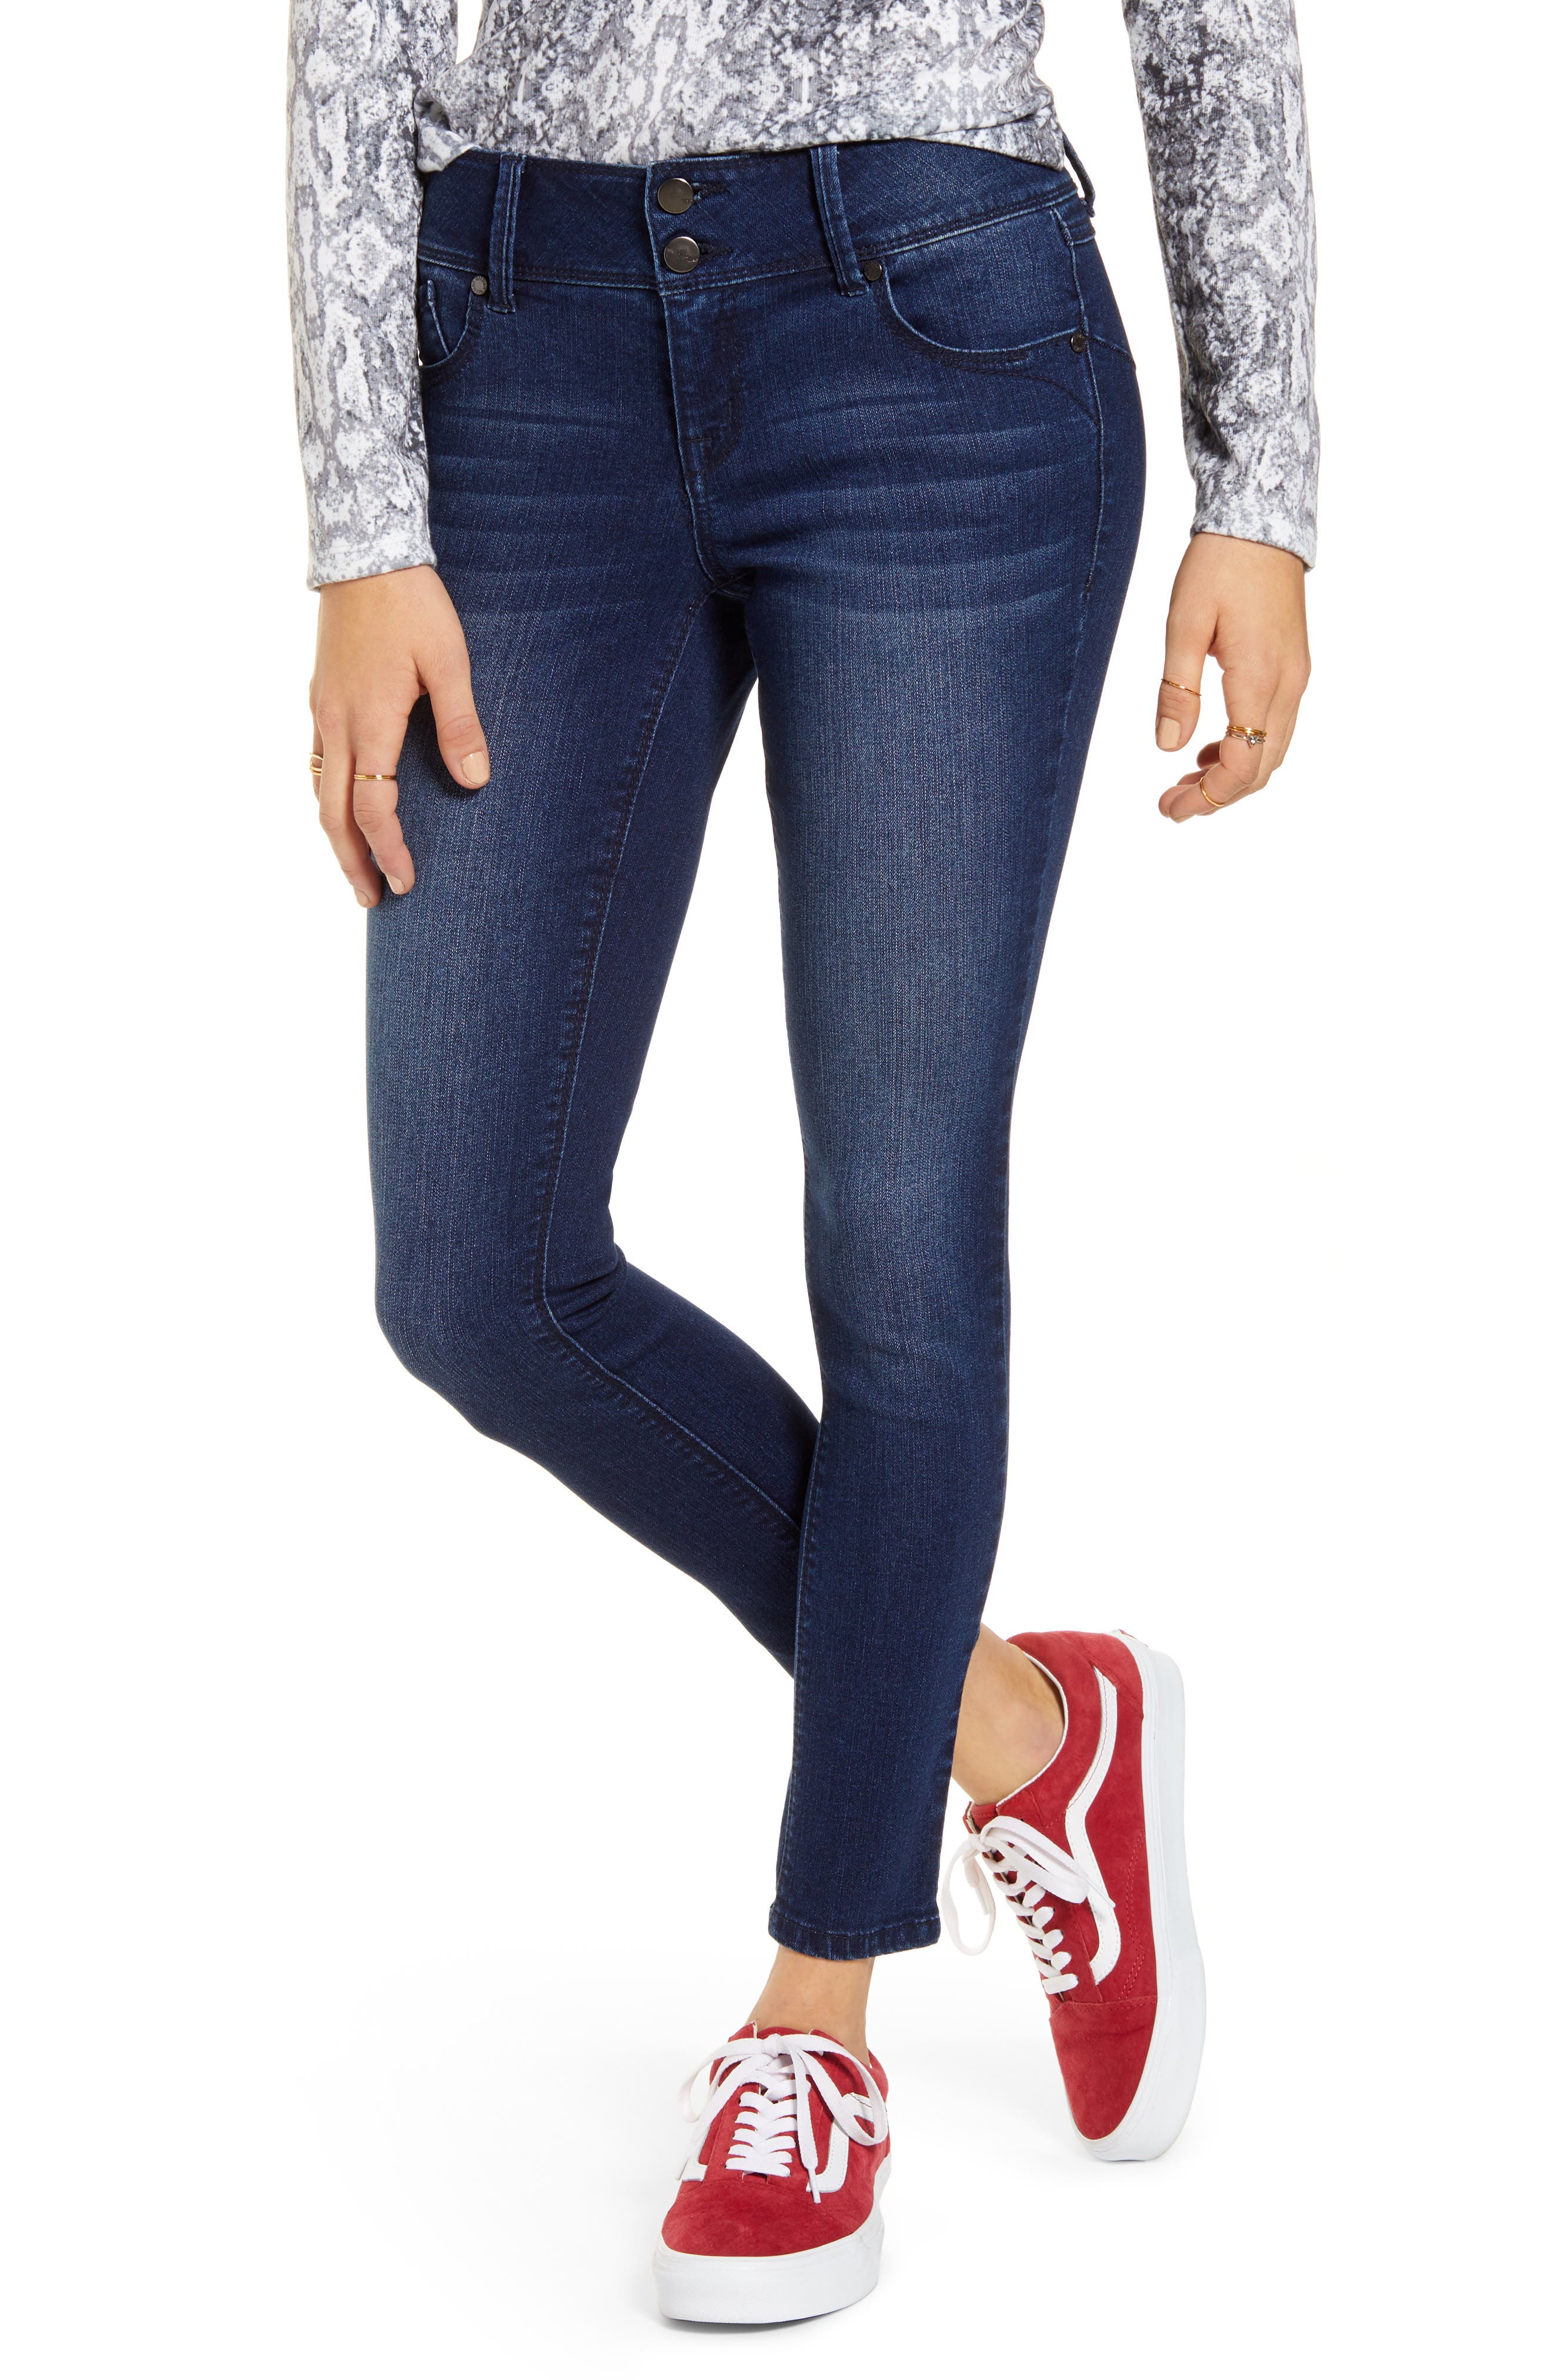 1822 ankle skinny jeans